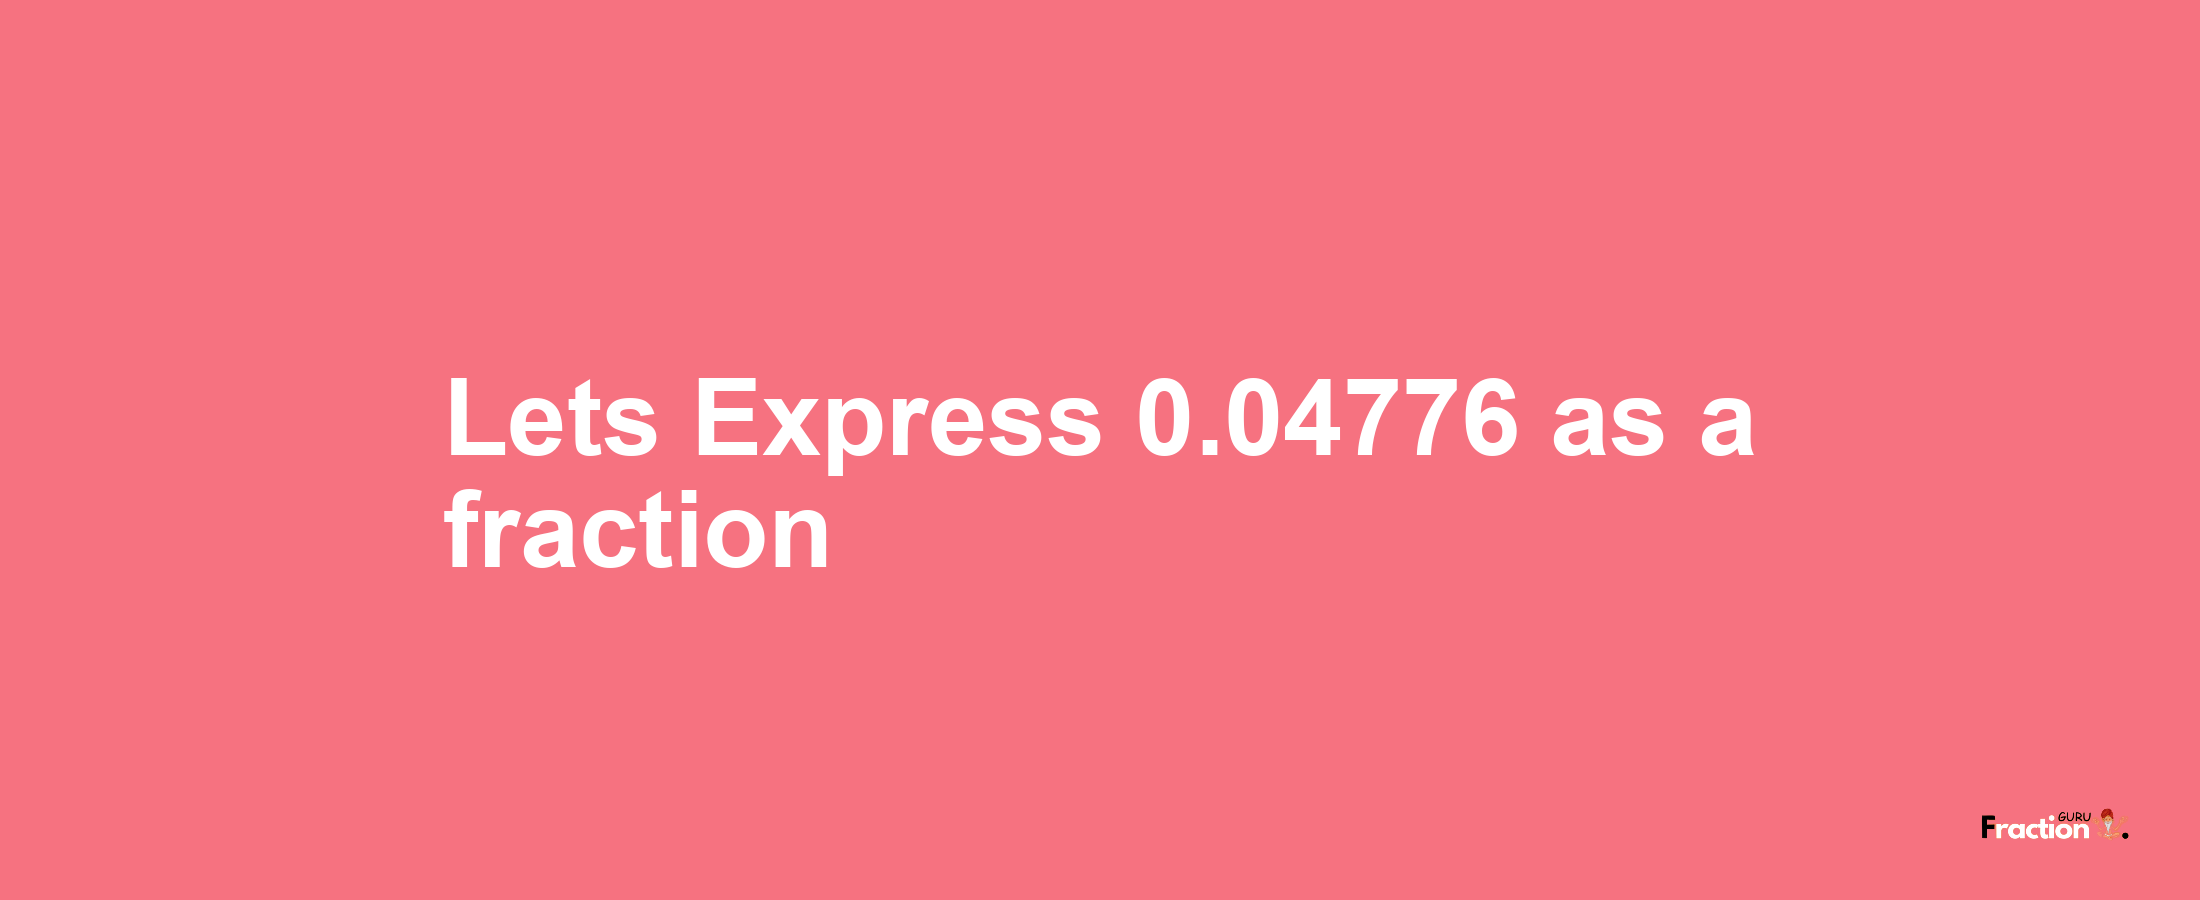 Lets Express 0.04776 as afraction